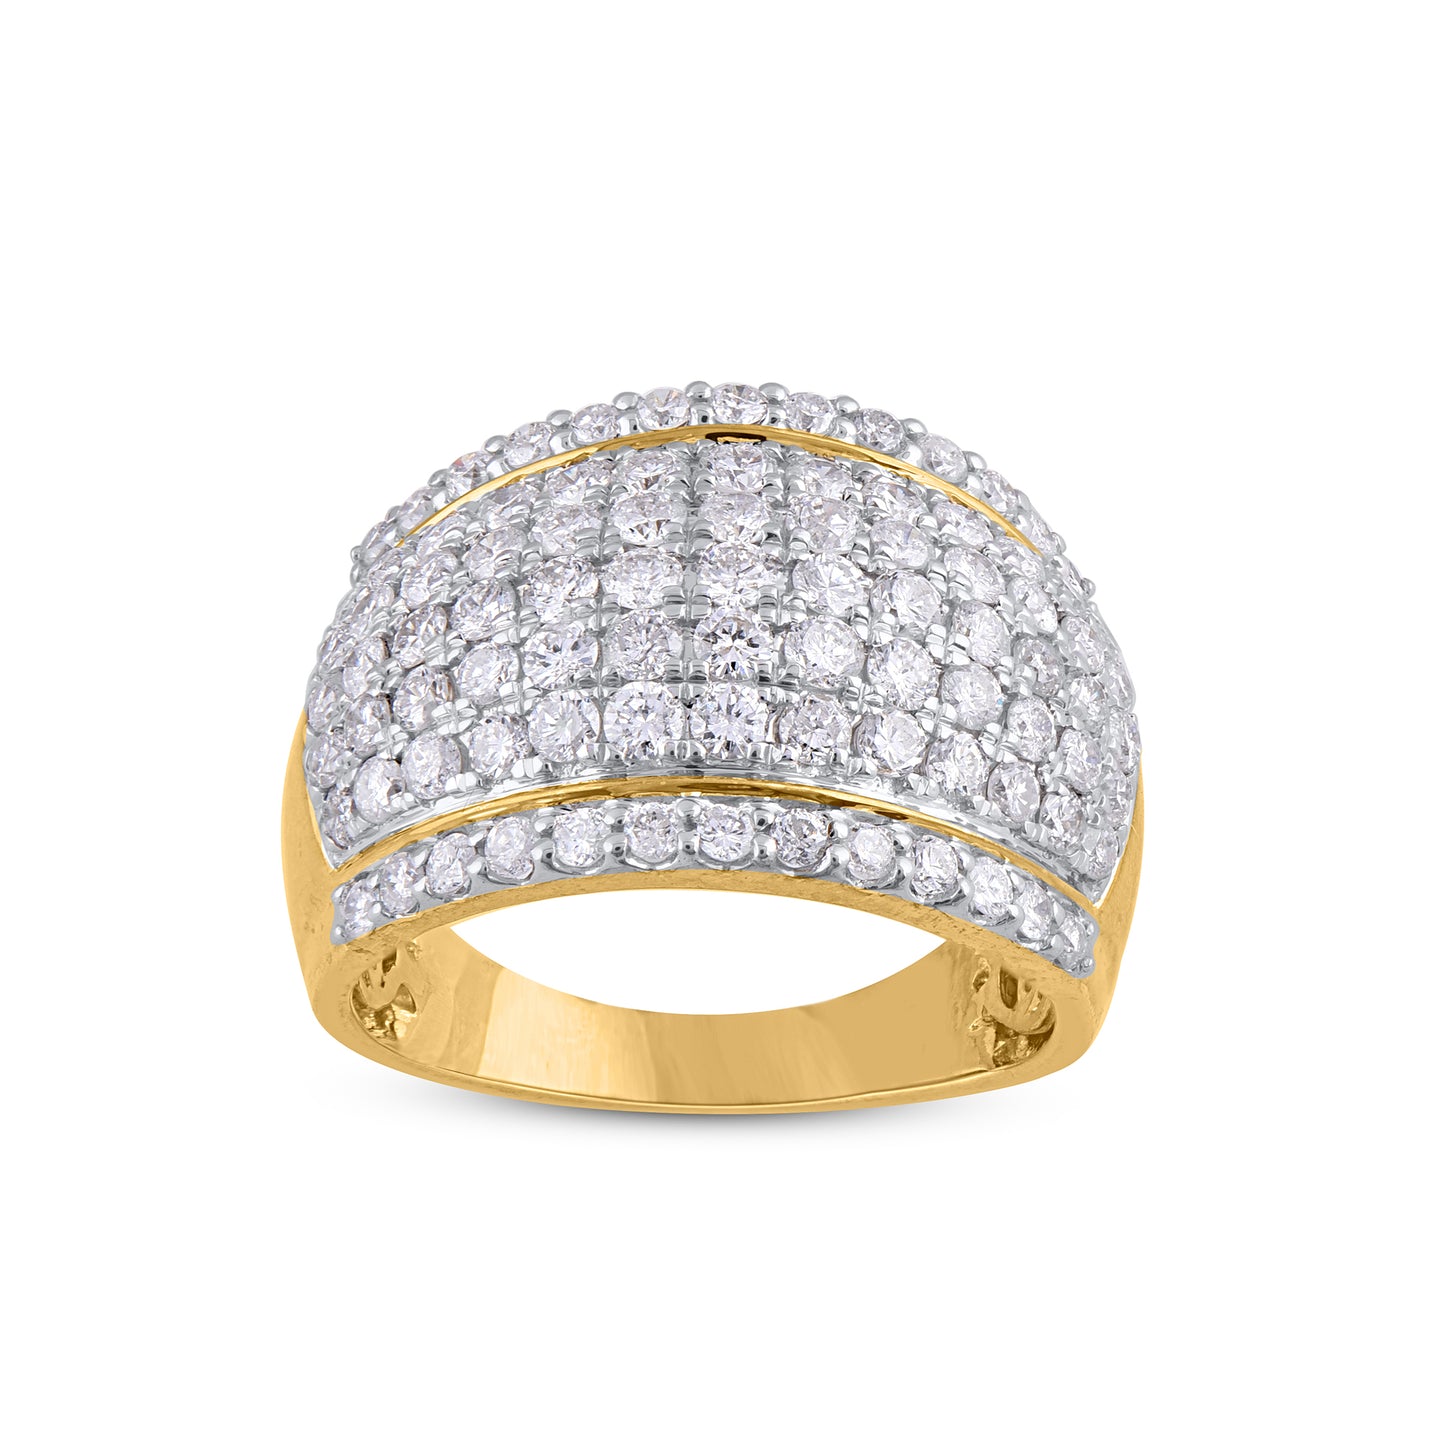 Multi Row Engagement Band in 10K Yellow Gold